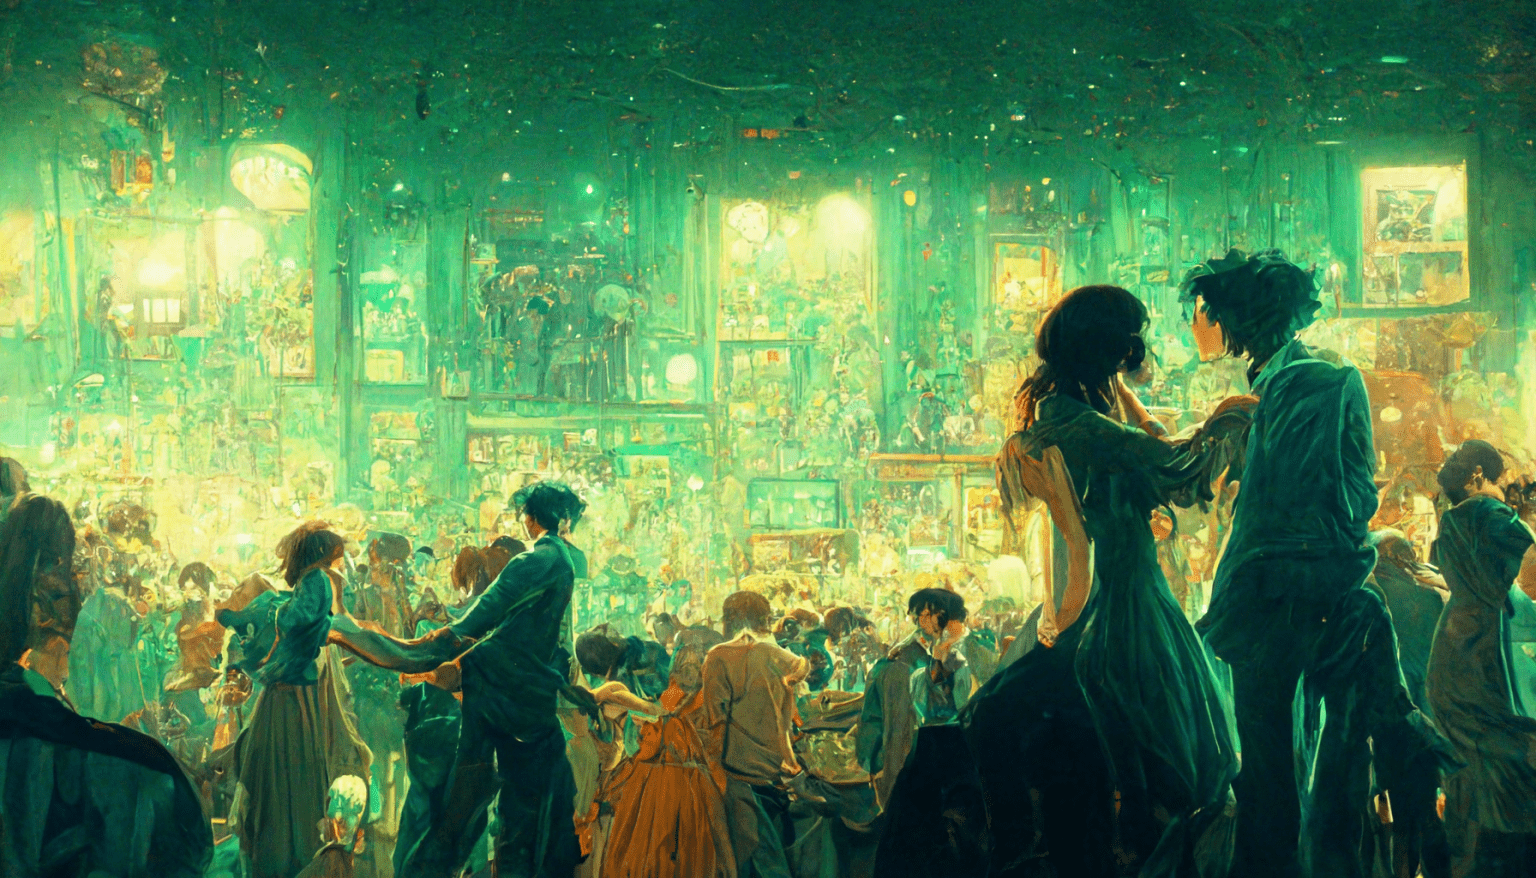 Claire_Fav_couple_dancing_with_a_crowded_room_in_the_background_c62d2724-cf7b-4761-981f-2094ed88e957